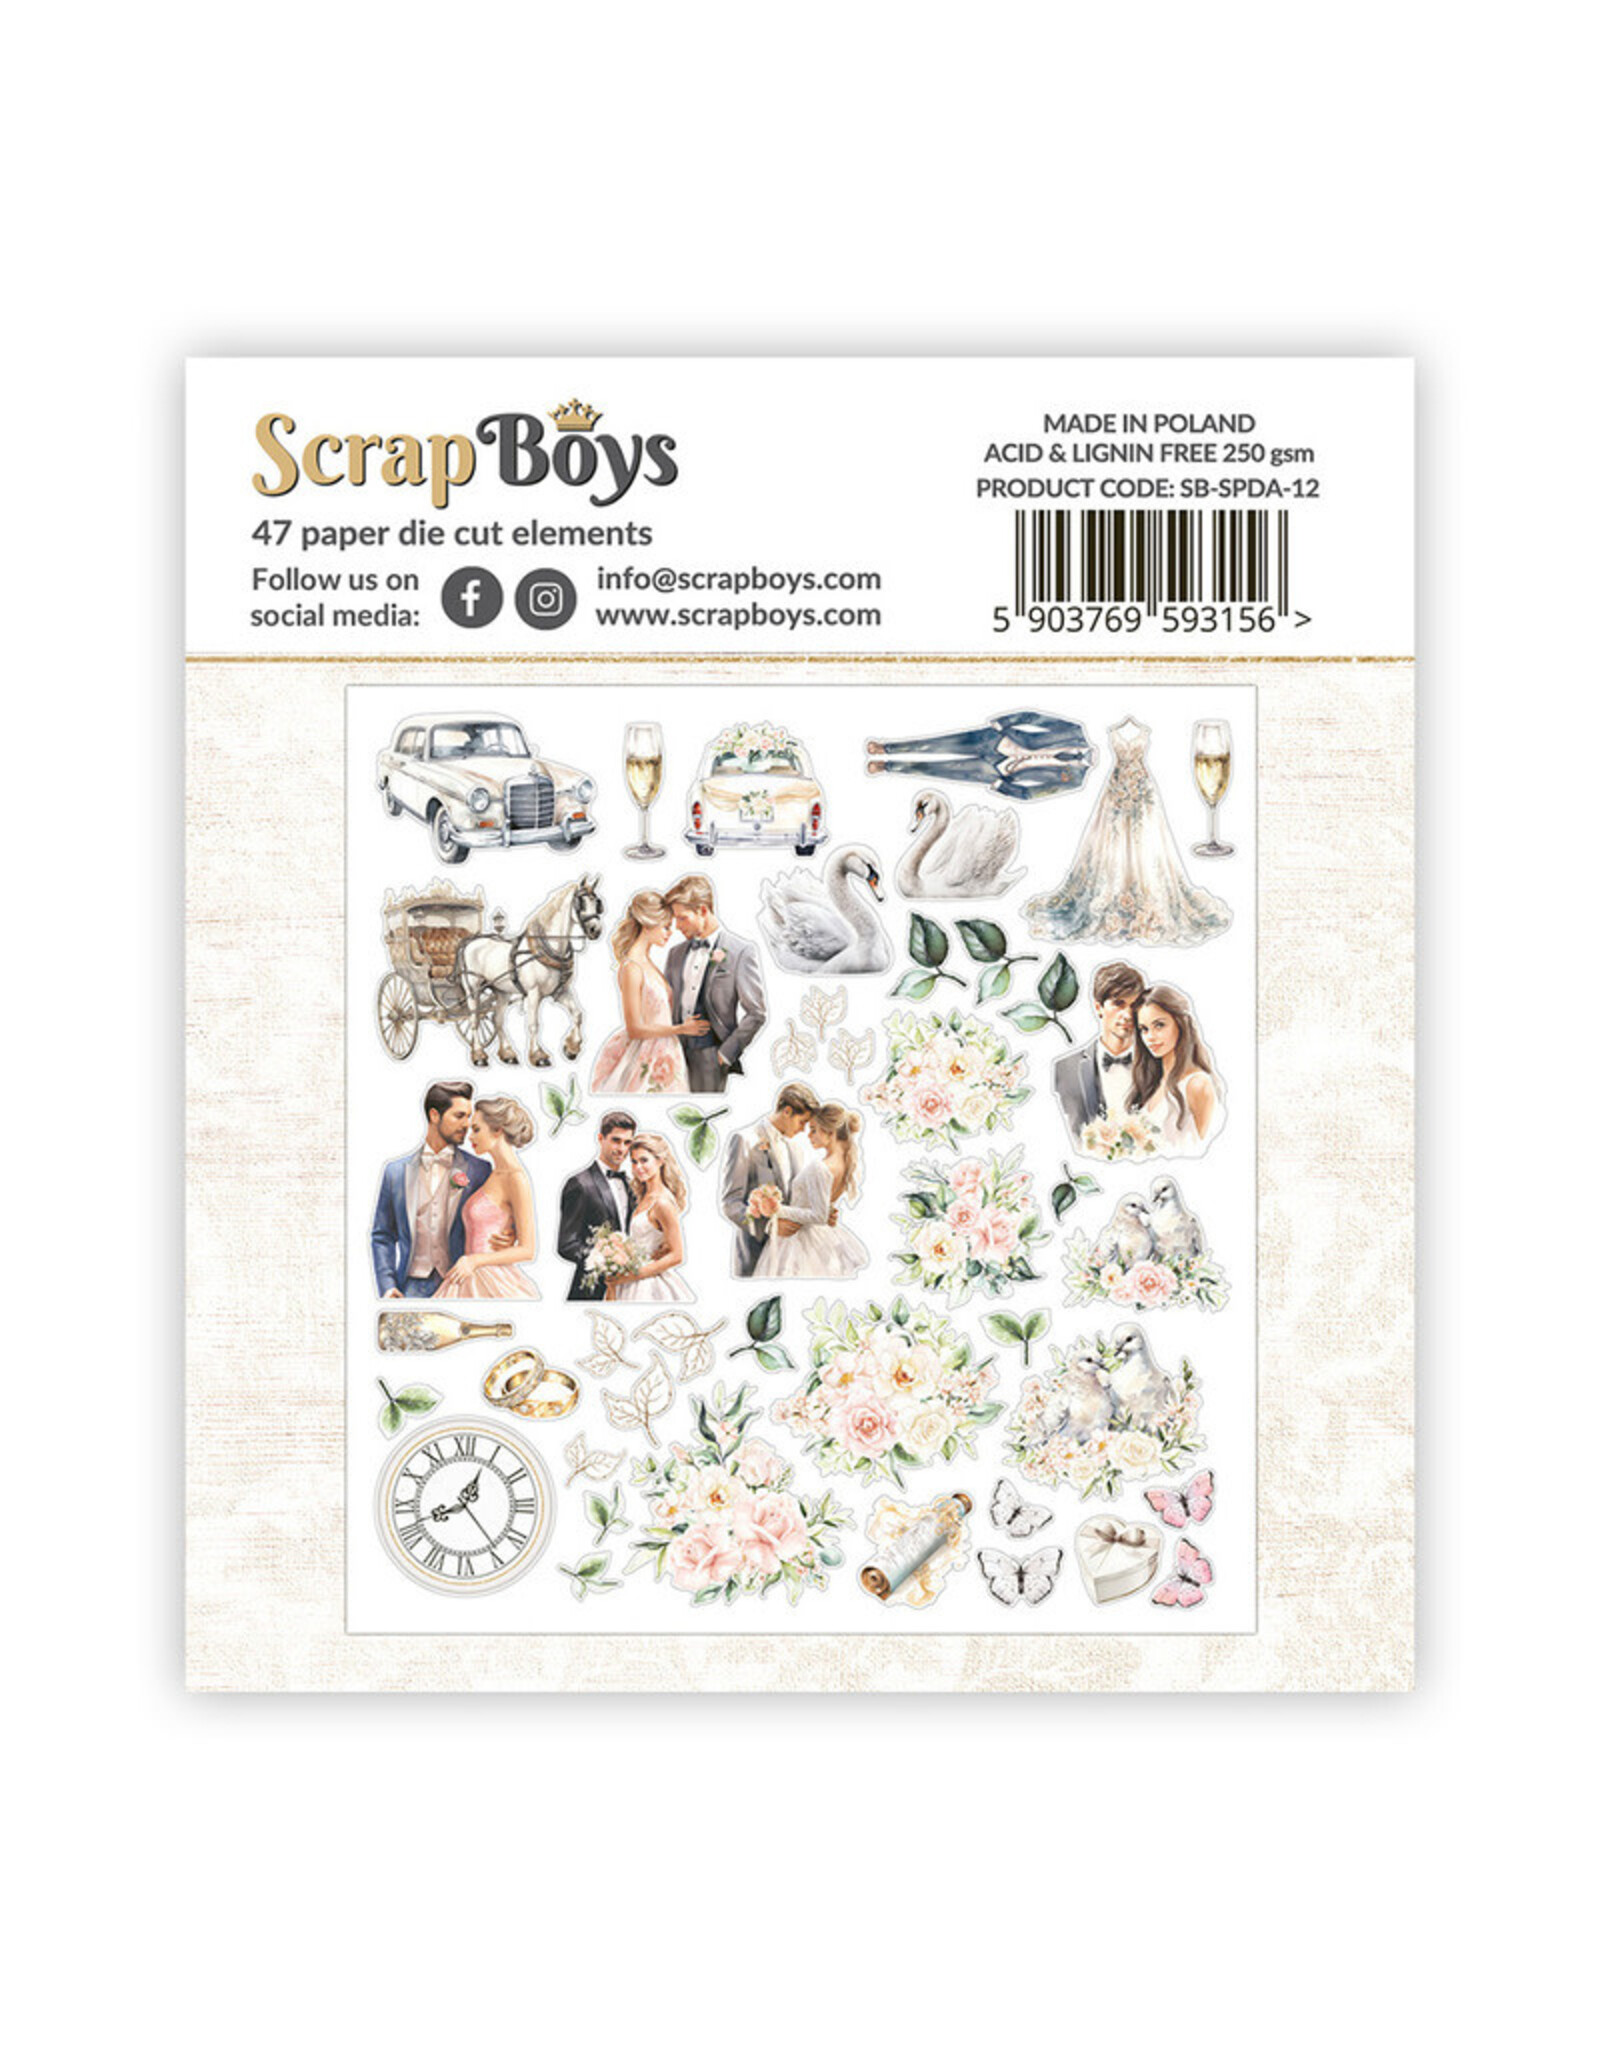 SCRAPBOYS SCRAPBOYS SPECIAL DAY DOUBLE SIDED DIE CUT ELEMENTS